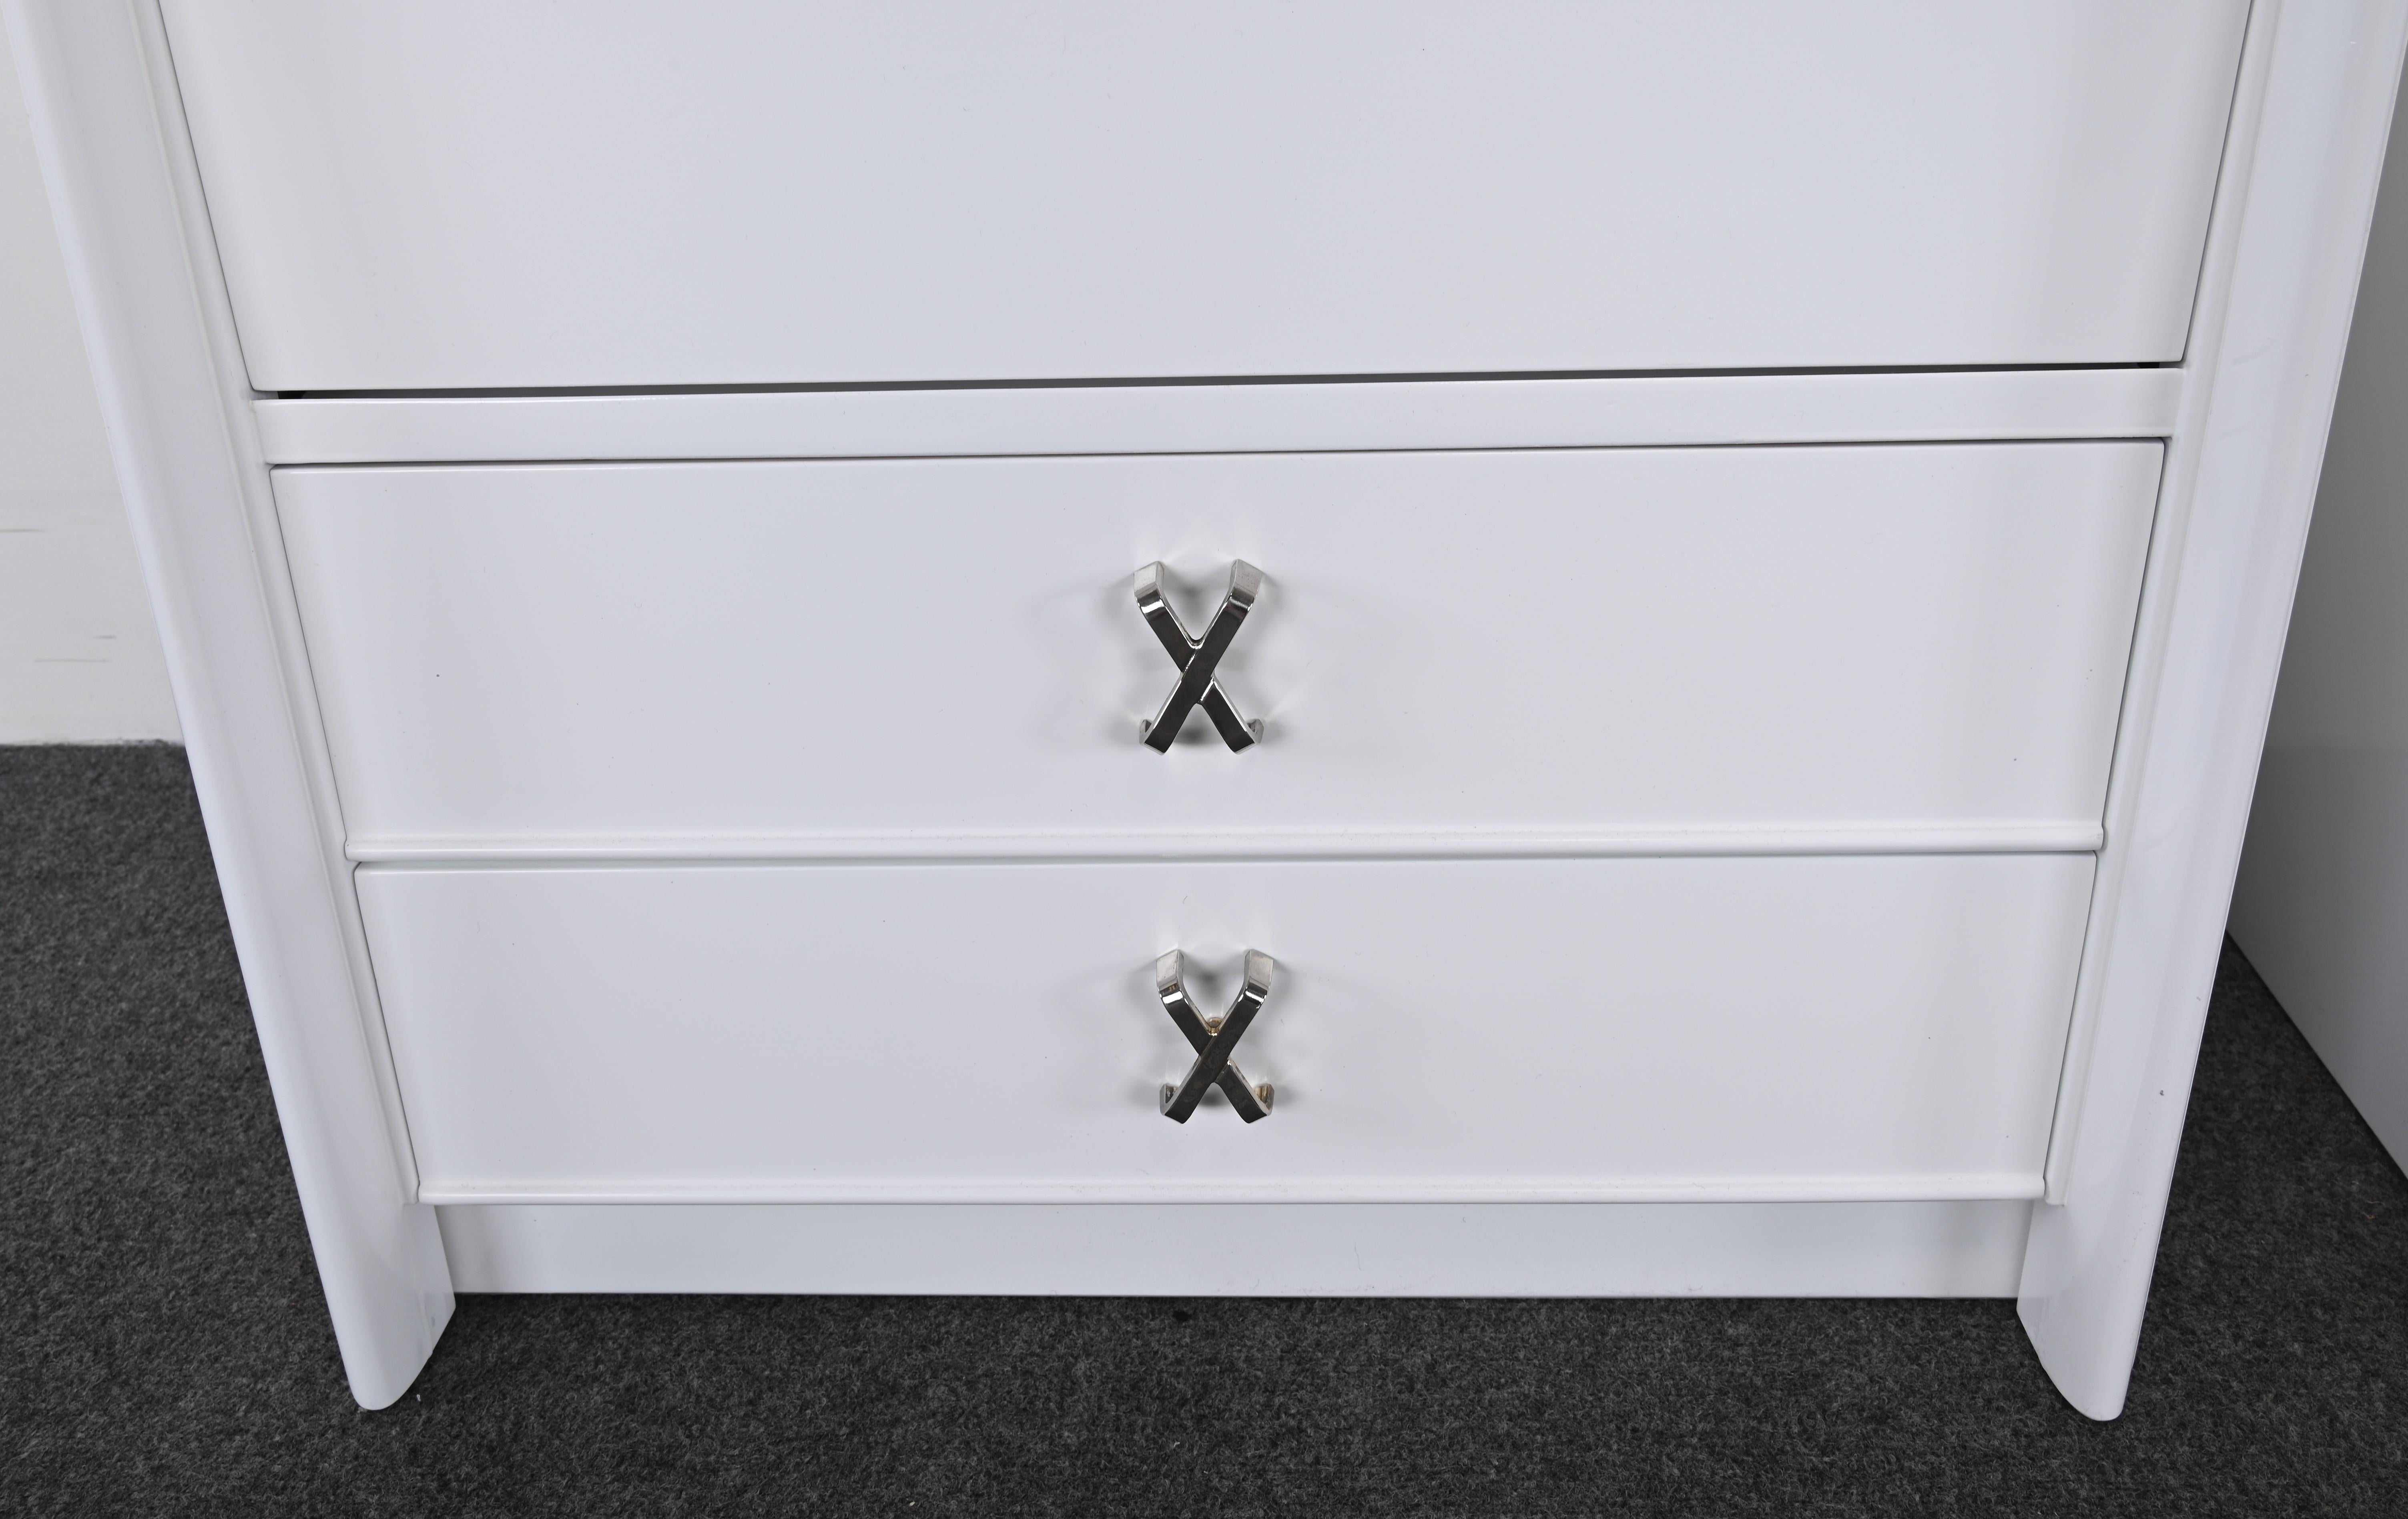 Pair of Bedside Tables with Silver X-Pulls by Paul Frankl, 1950 For Sale 1